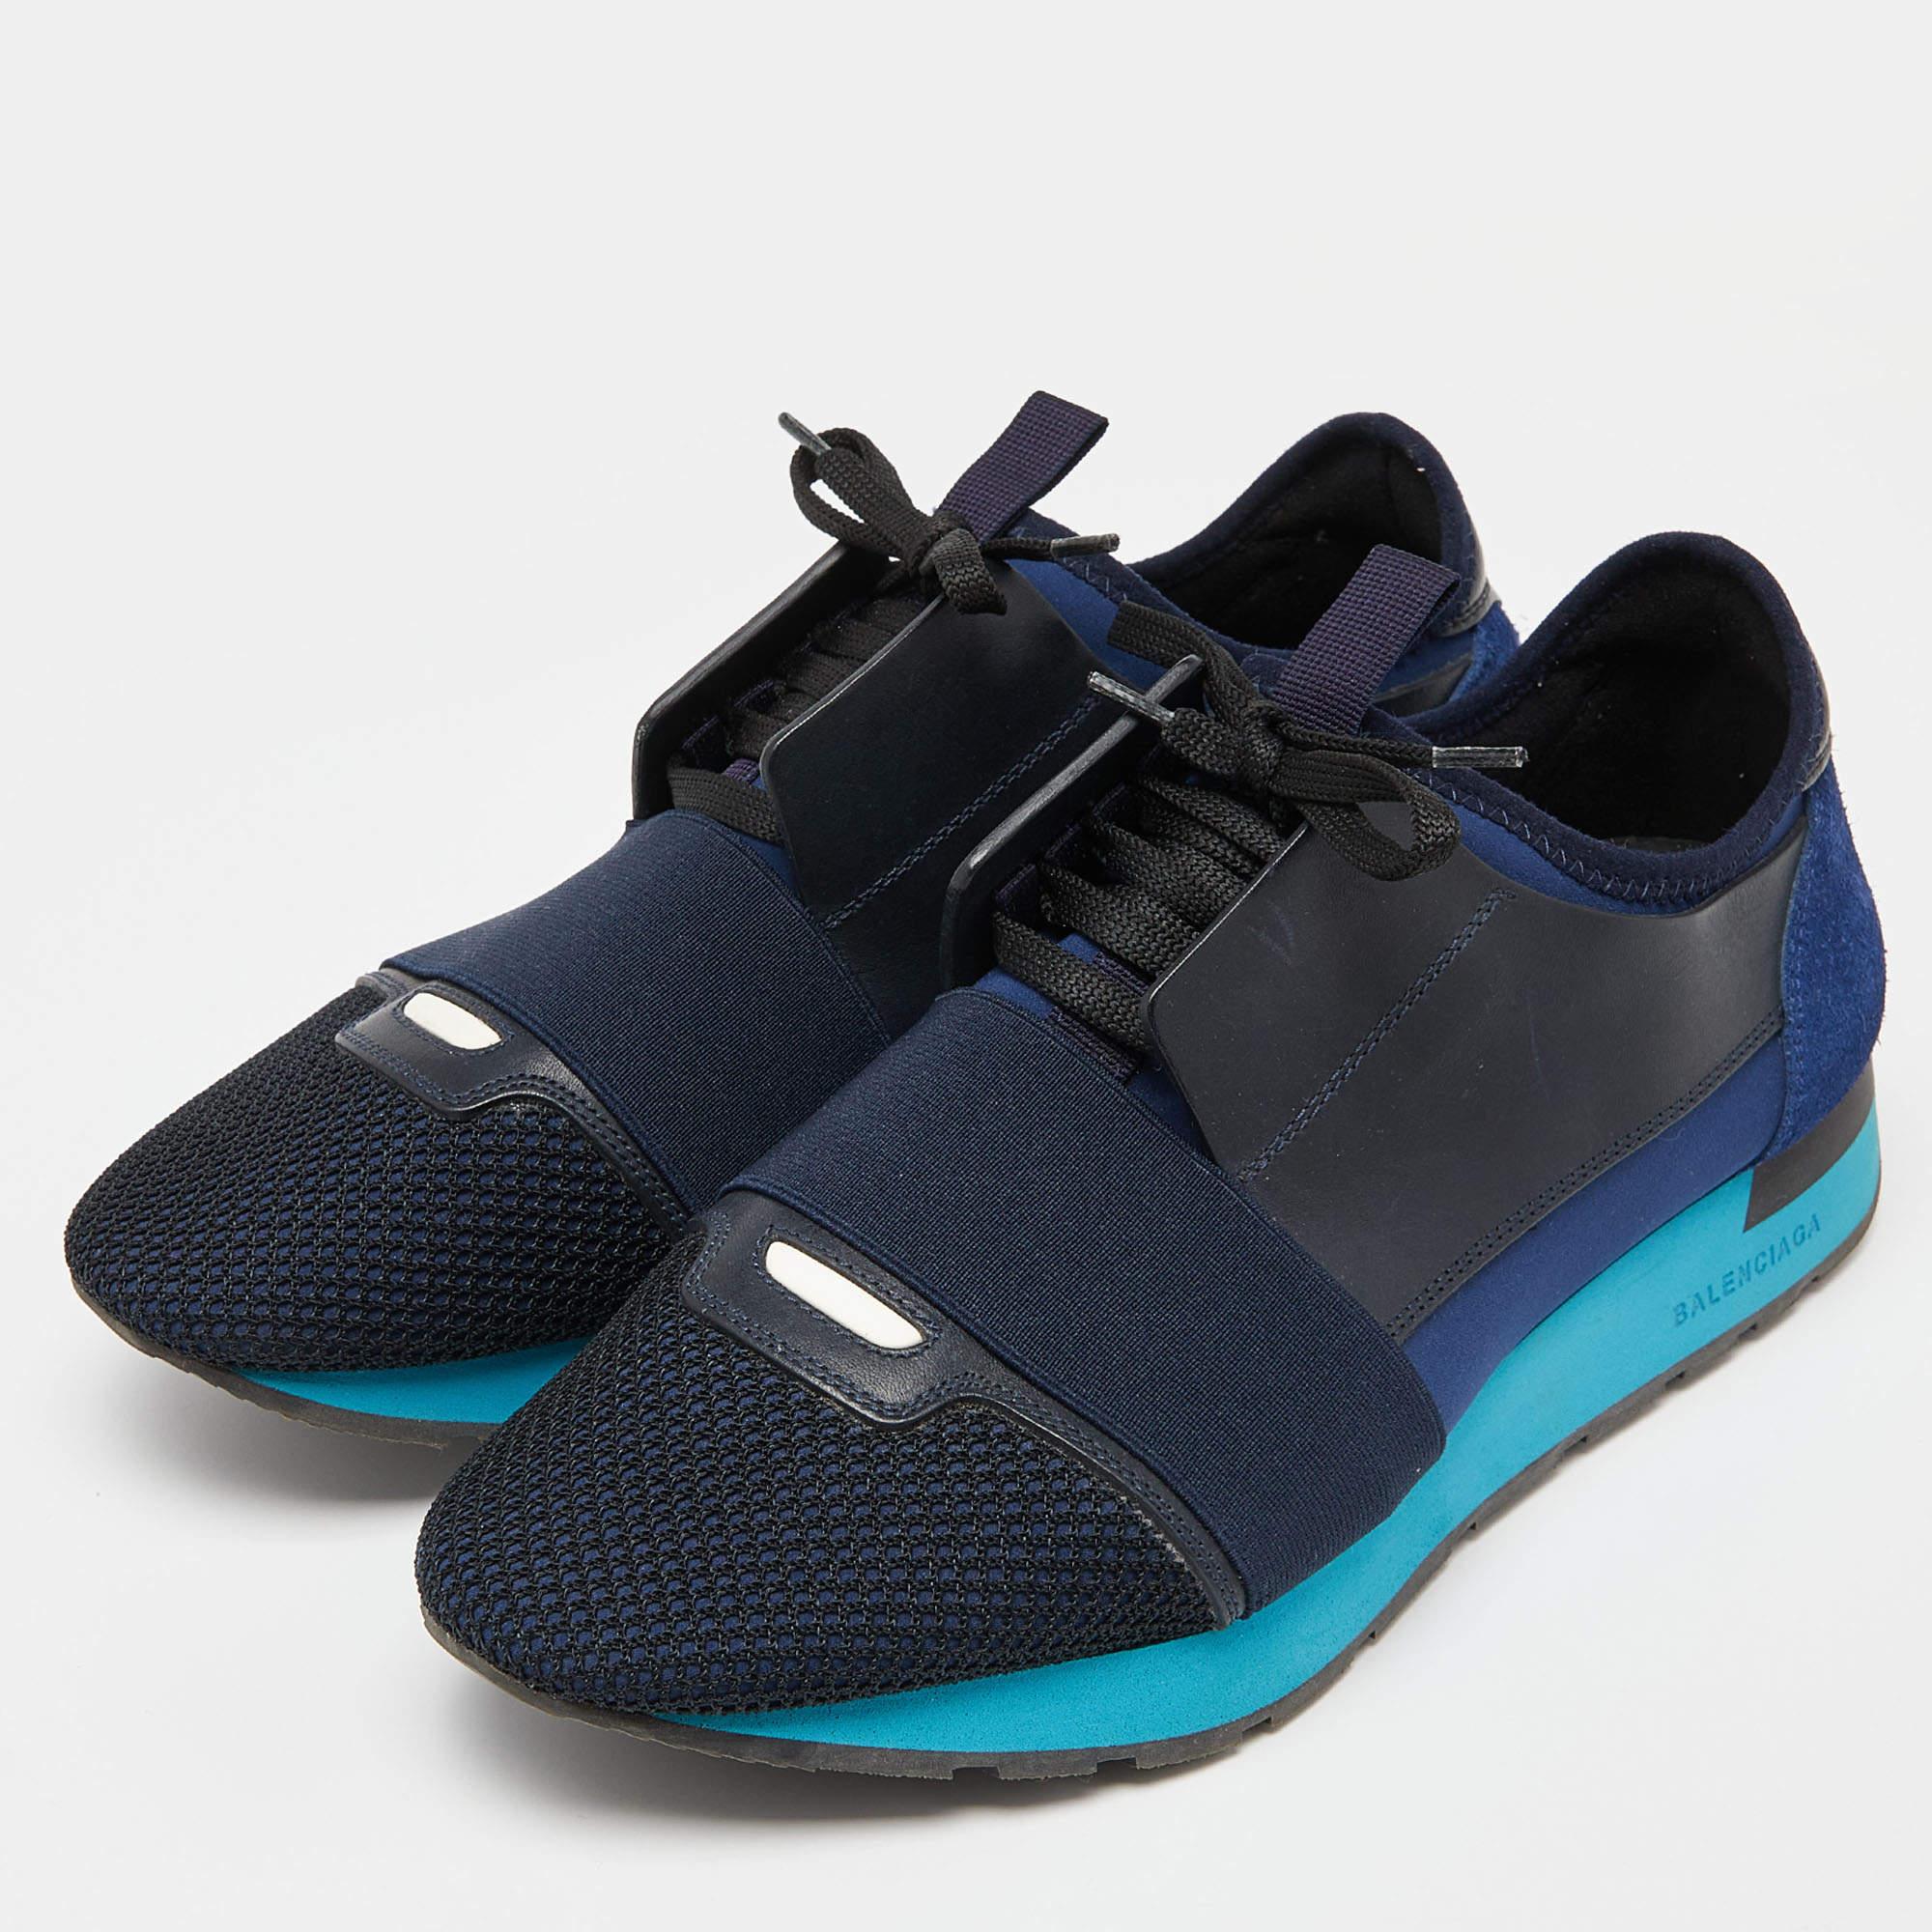 Let your latest addition be this pair of Race Runners sneakers from Balenciaga. Its exterior is crafted using leather as well as mesh with covered toes, strap detailing on the vamps, and lace-up fastenings. This pair is completed with a